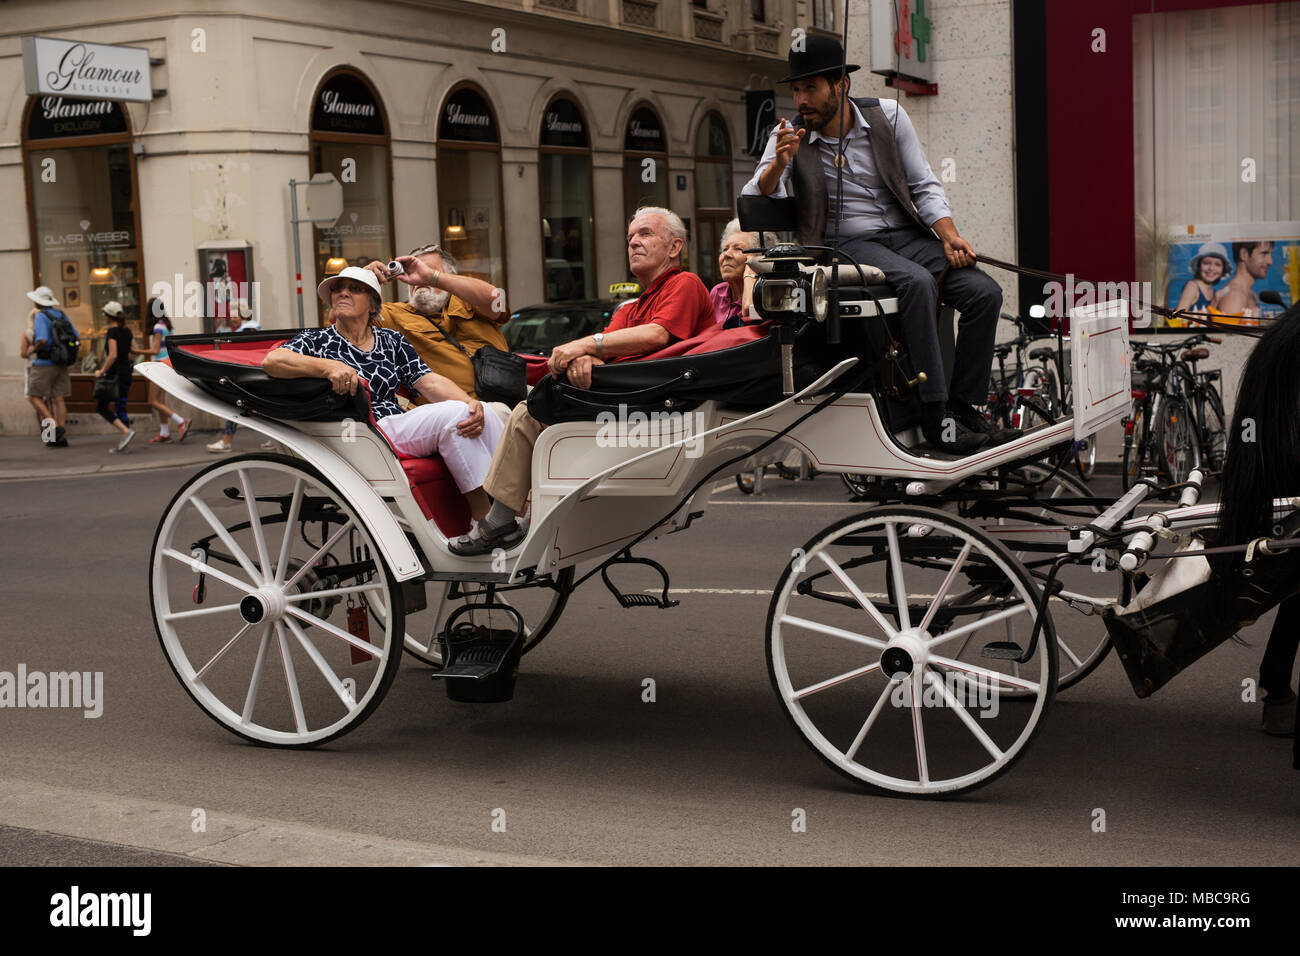 A horse-drawn carriage carries tourists around the streets of Vienna, Austria. Stock Photo